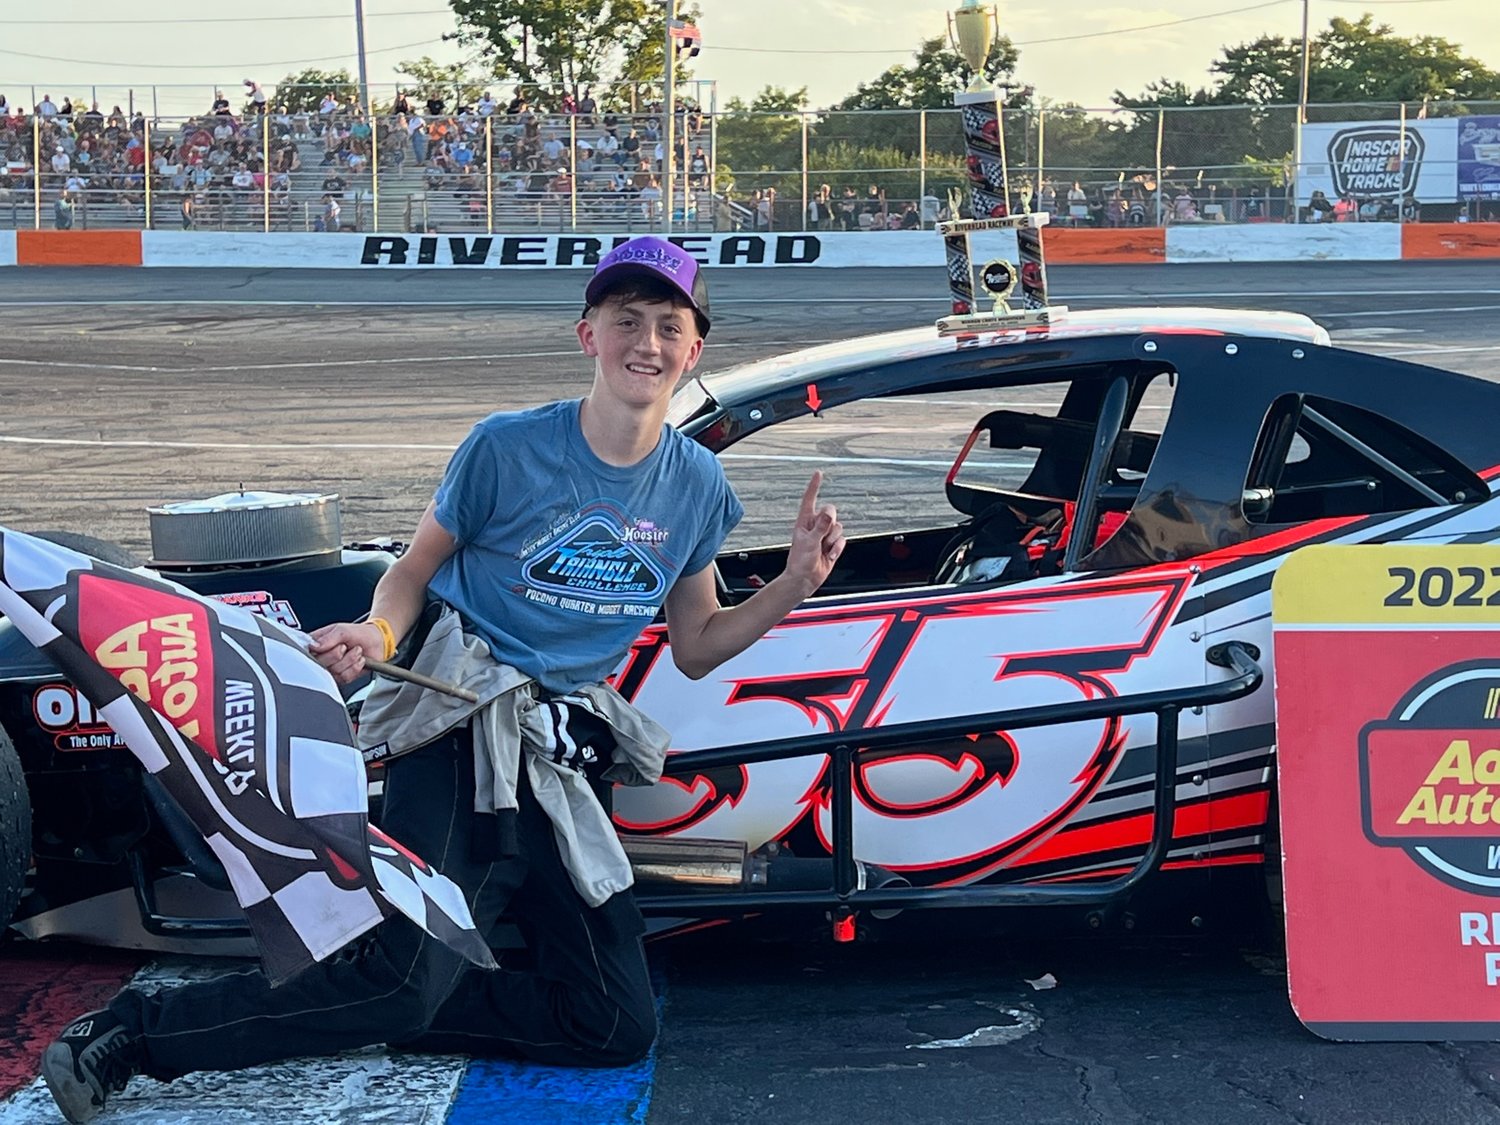 Chase Grennan finished the end of the season with a 2nd place standing. He often works on his car with his brother, Owen Grennan, before many of their races.